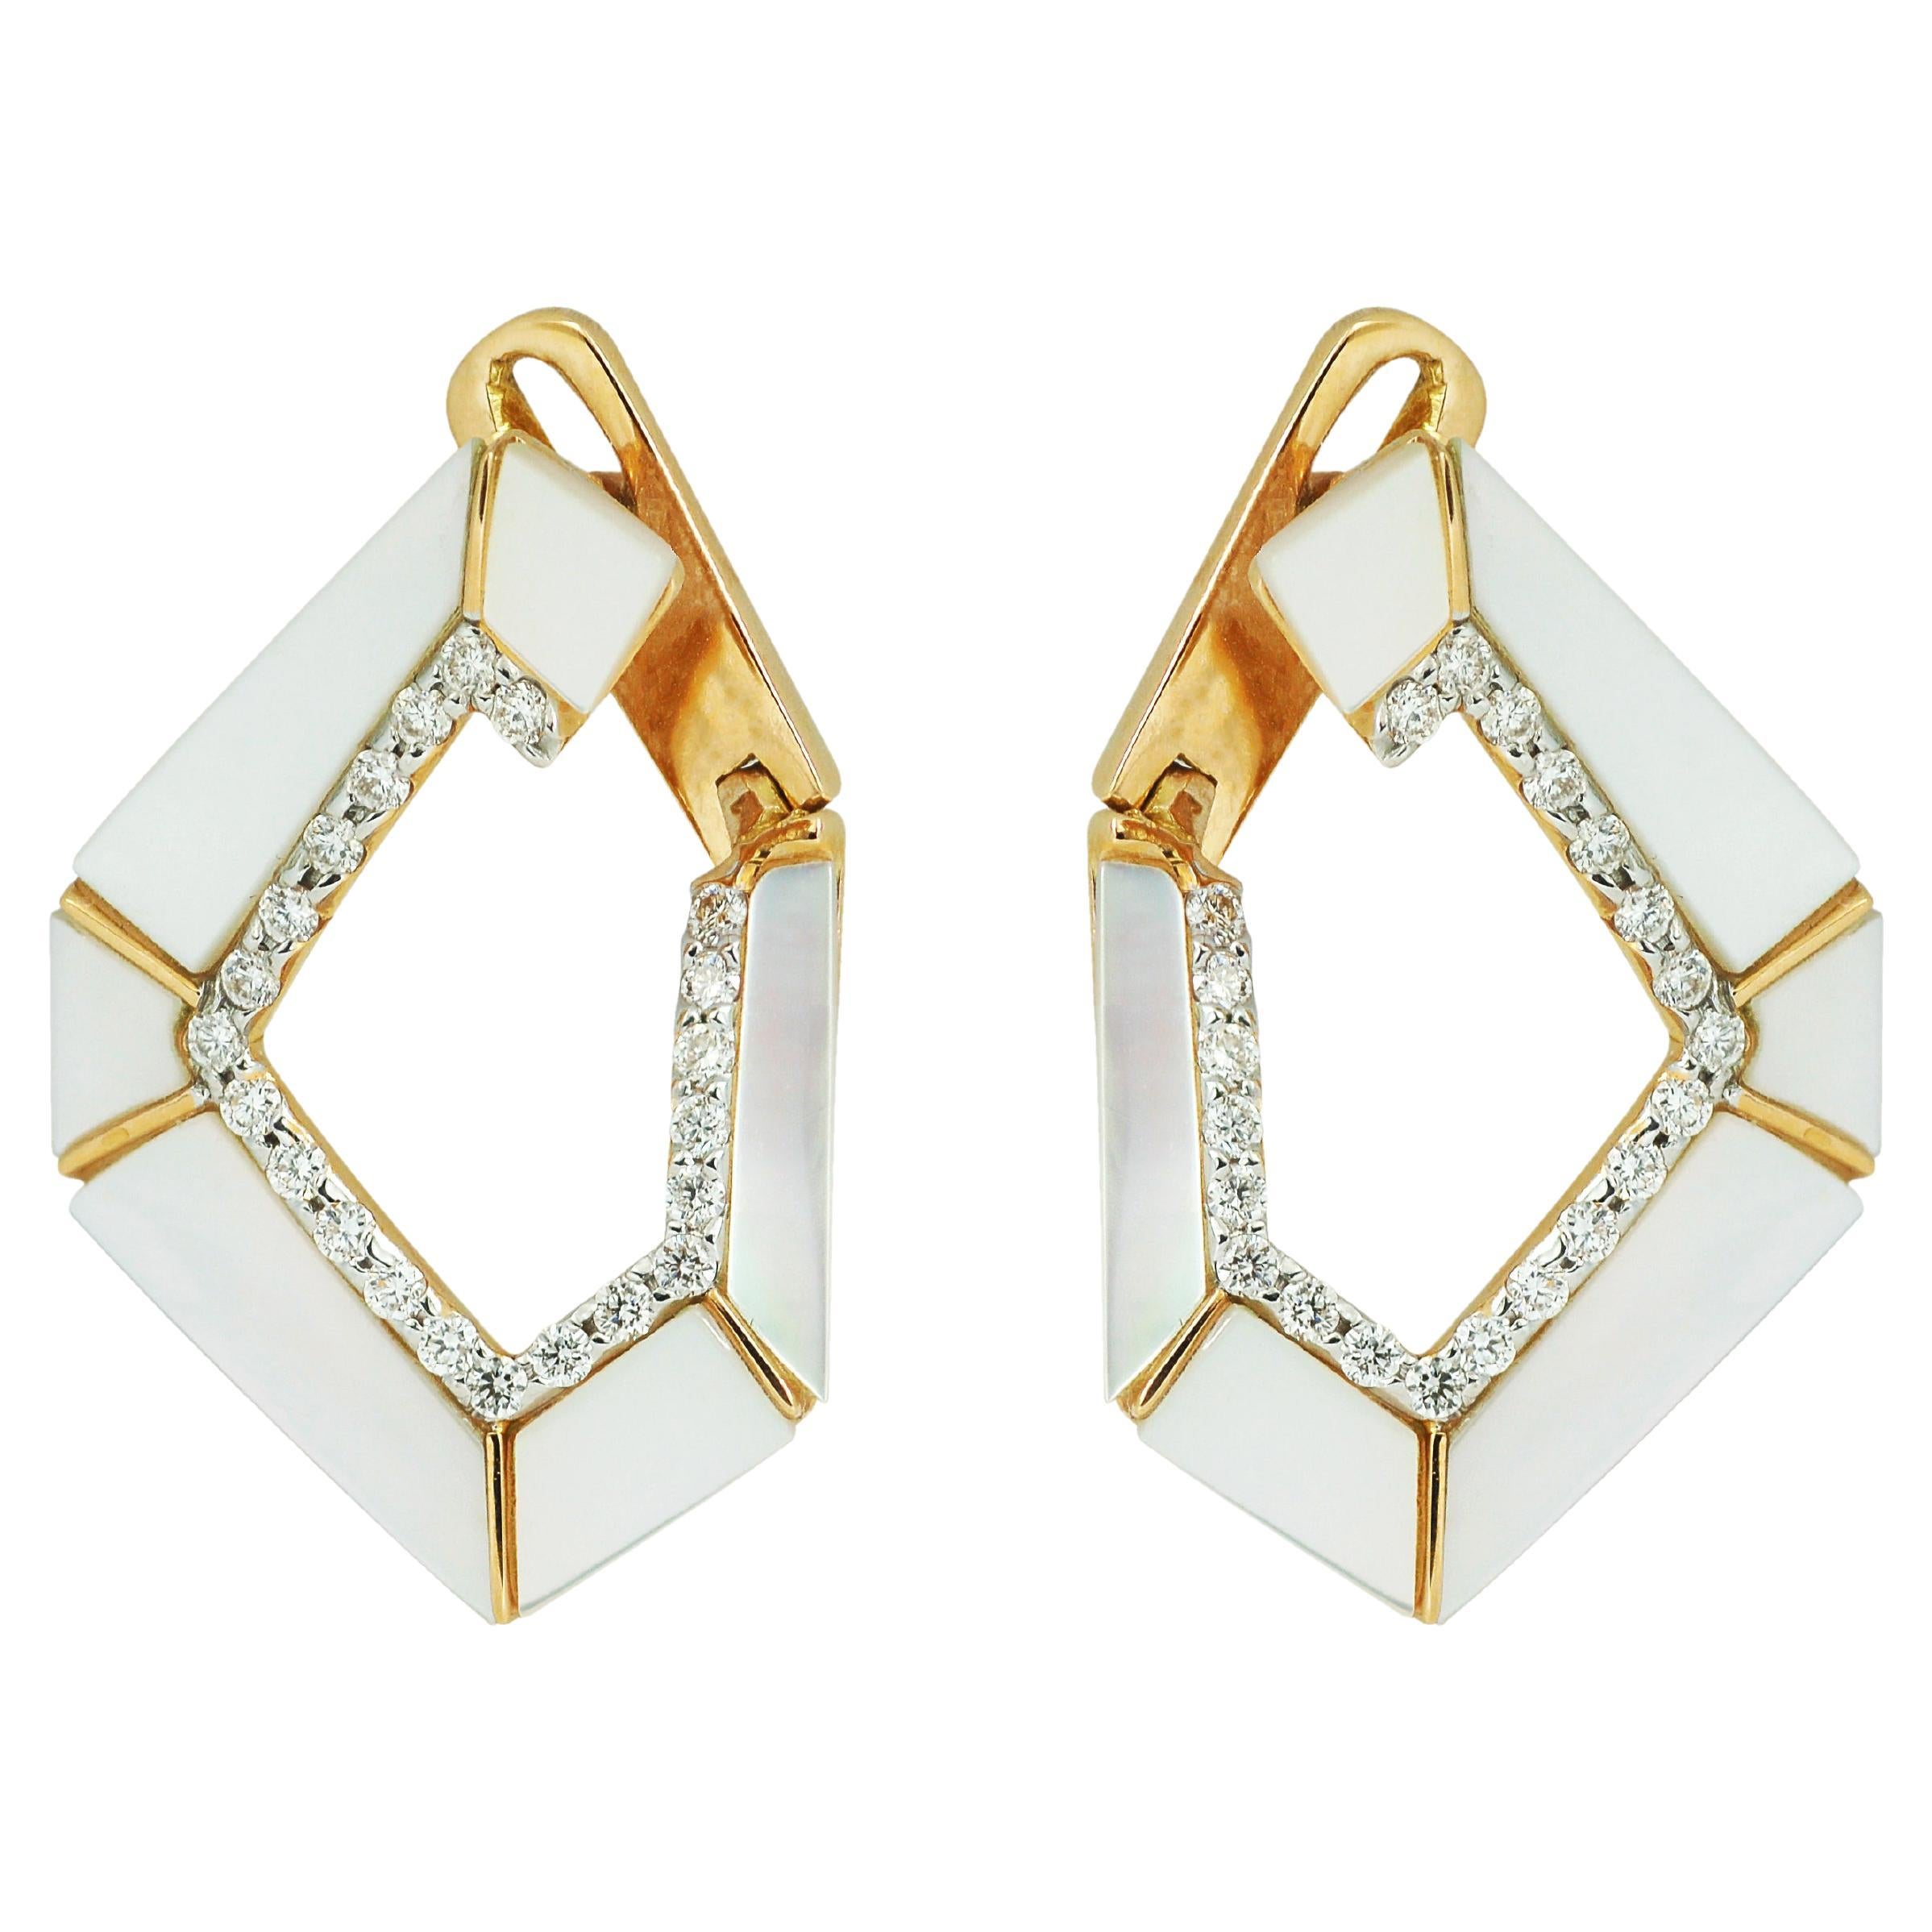 Origami Link No. 5 Mother of Pearl and Diamond Grande Earrings 18k Gold